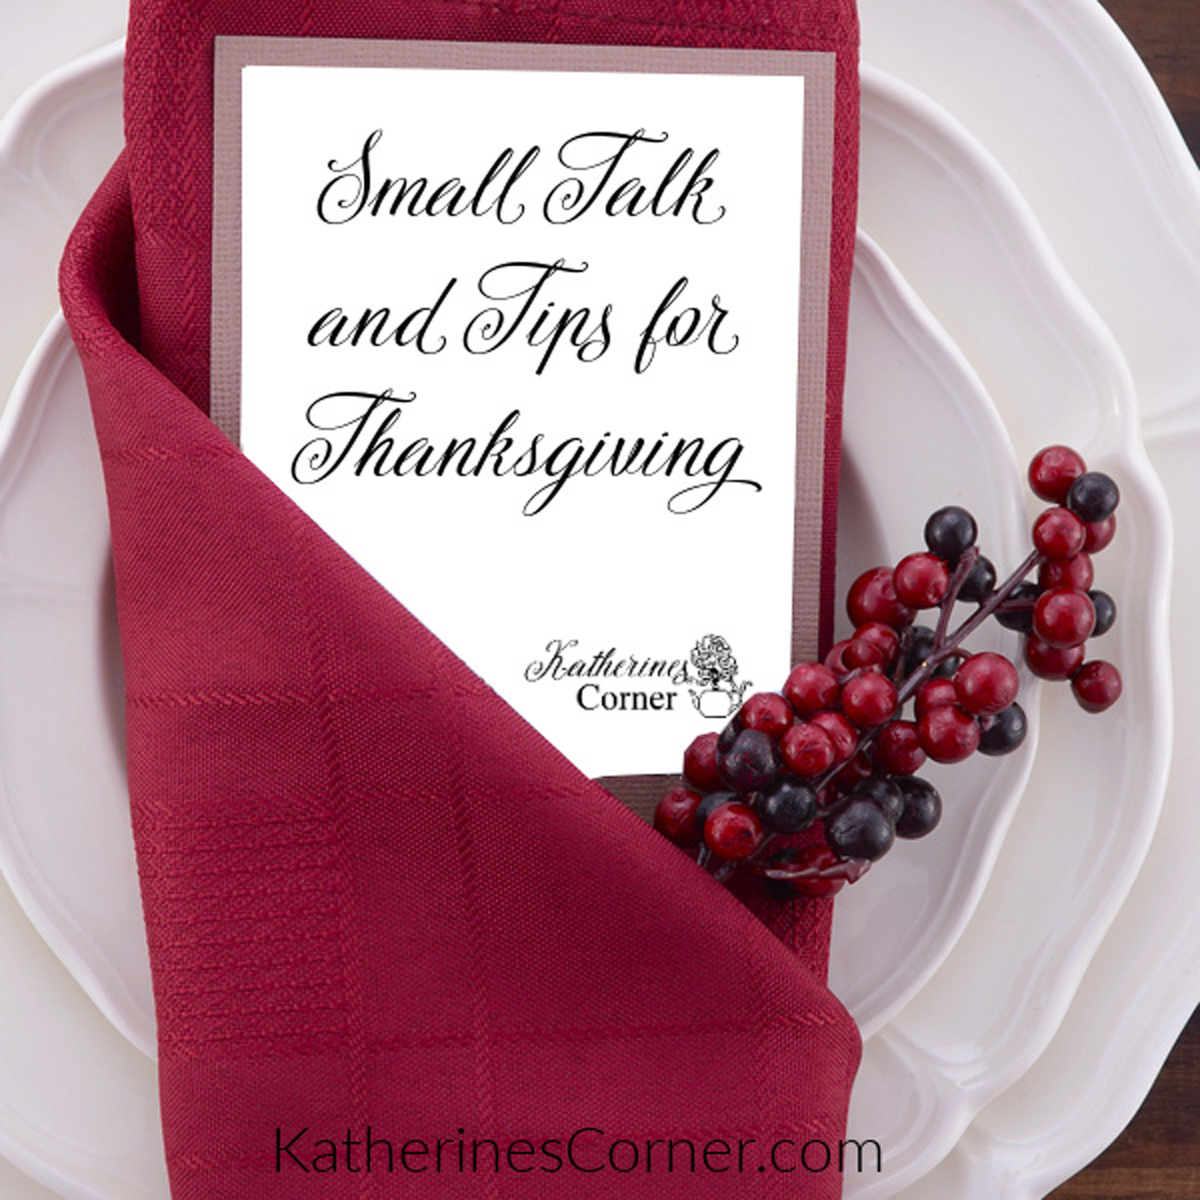 Small Talk and Tips for Thanksgiving